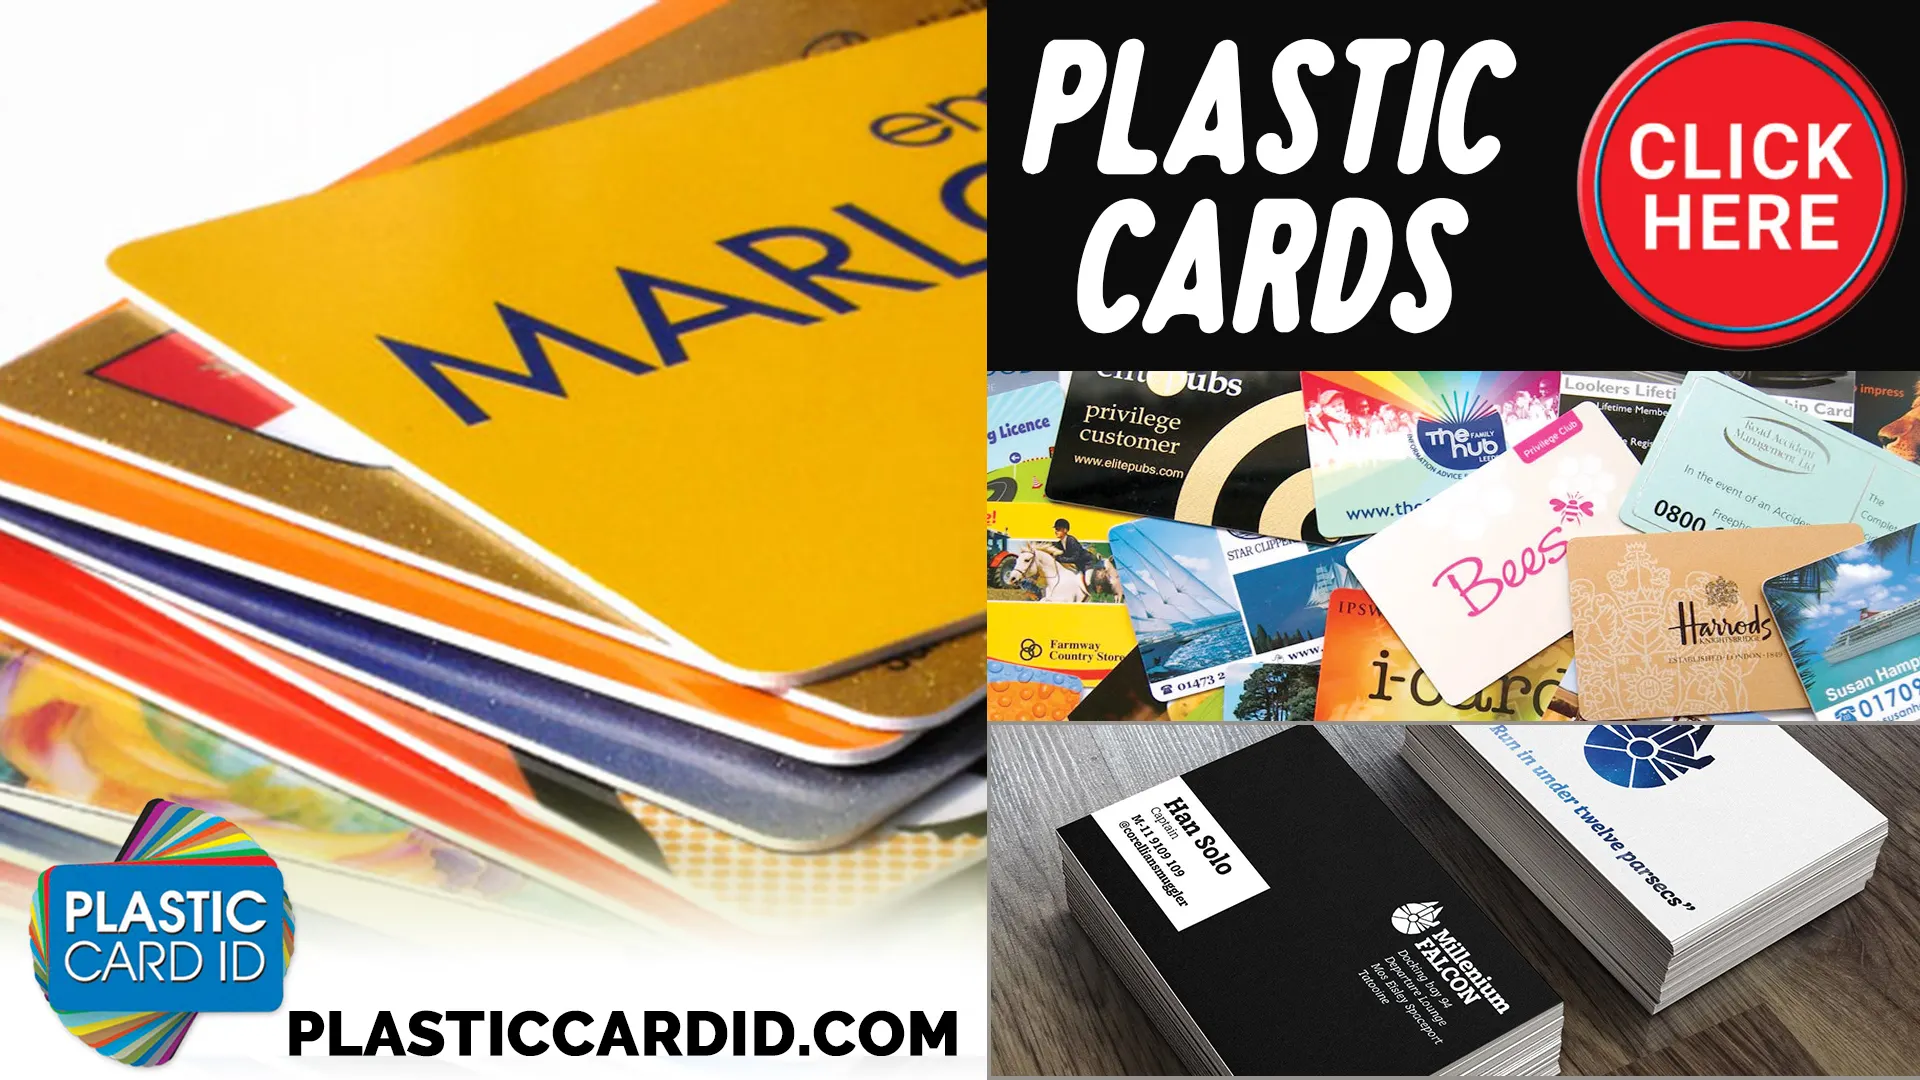 Plastic Cards as Financial Stalwarts